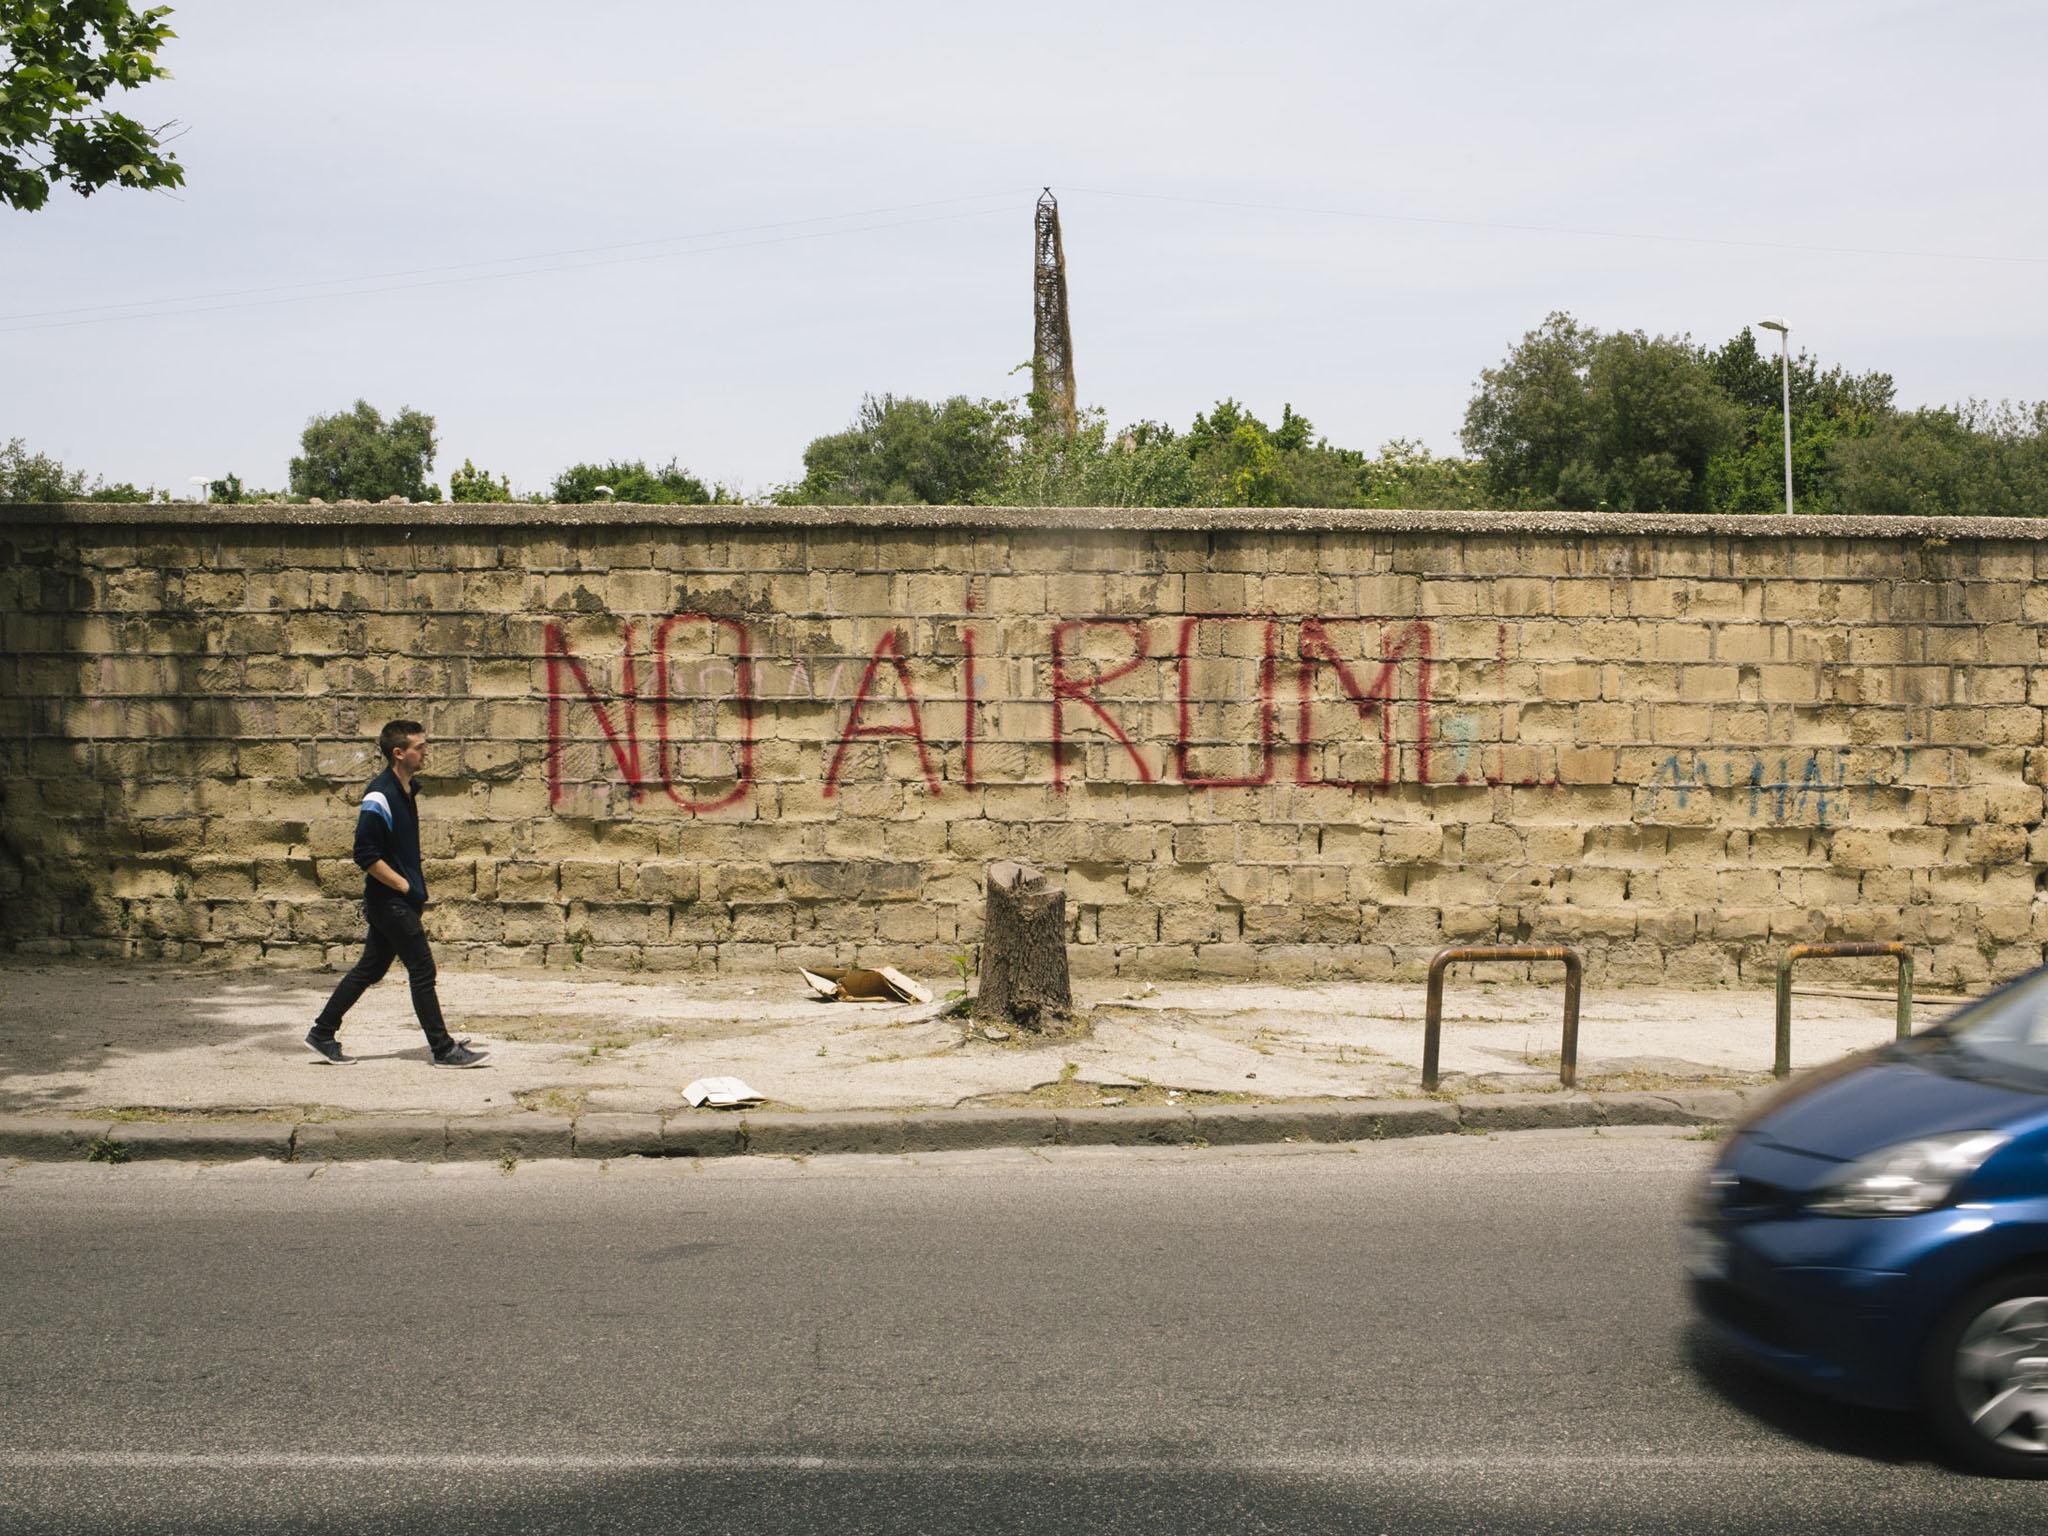 The perimeter wall surrounding the emergency housing is marred with anti-Roma graffiti